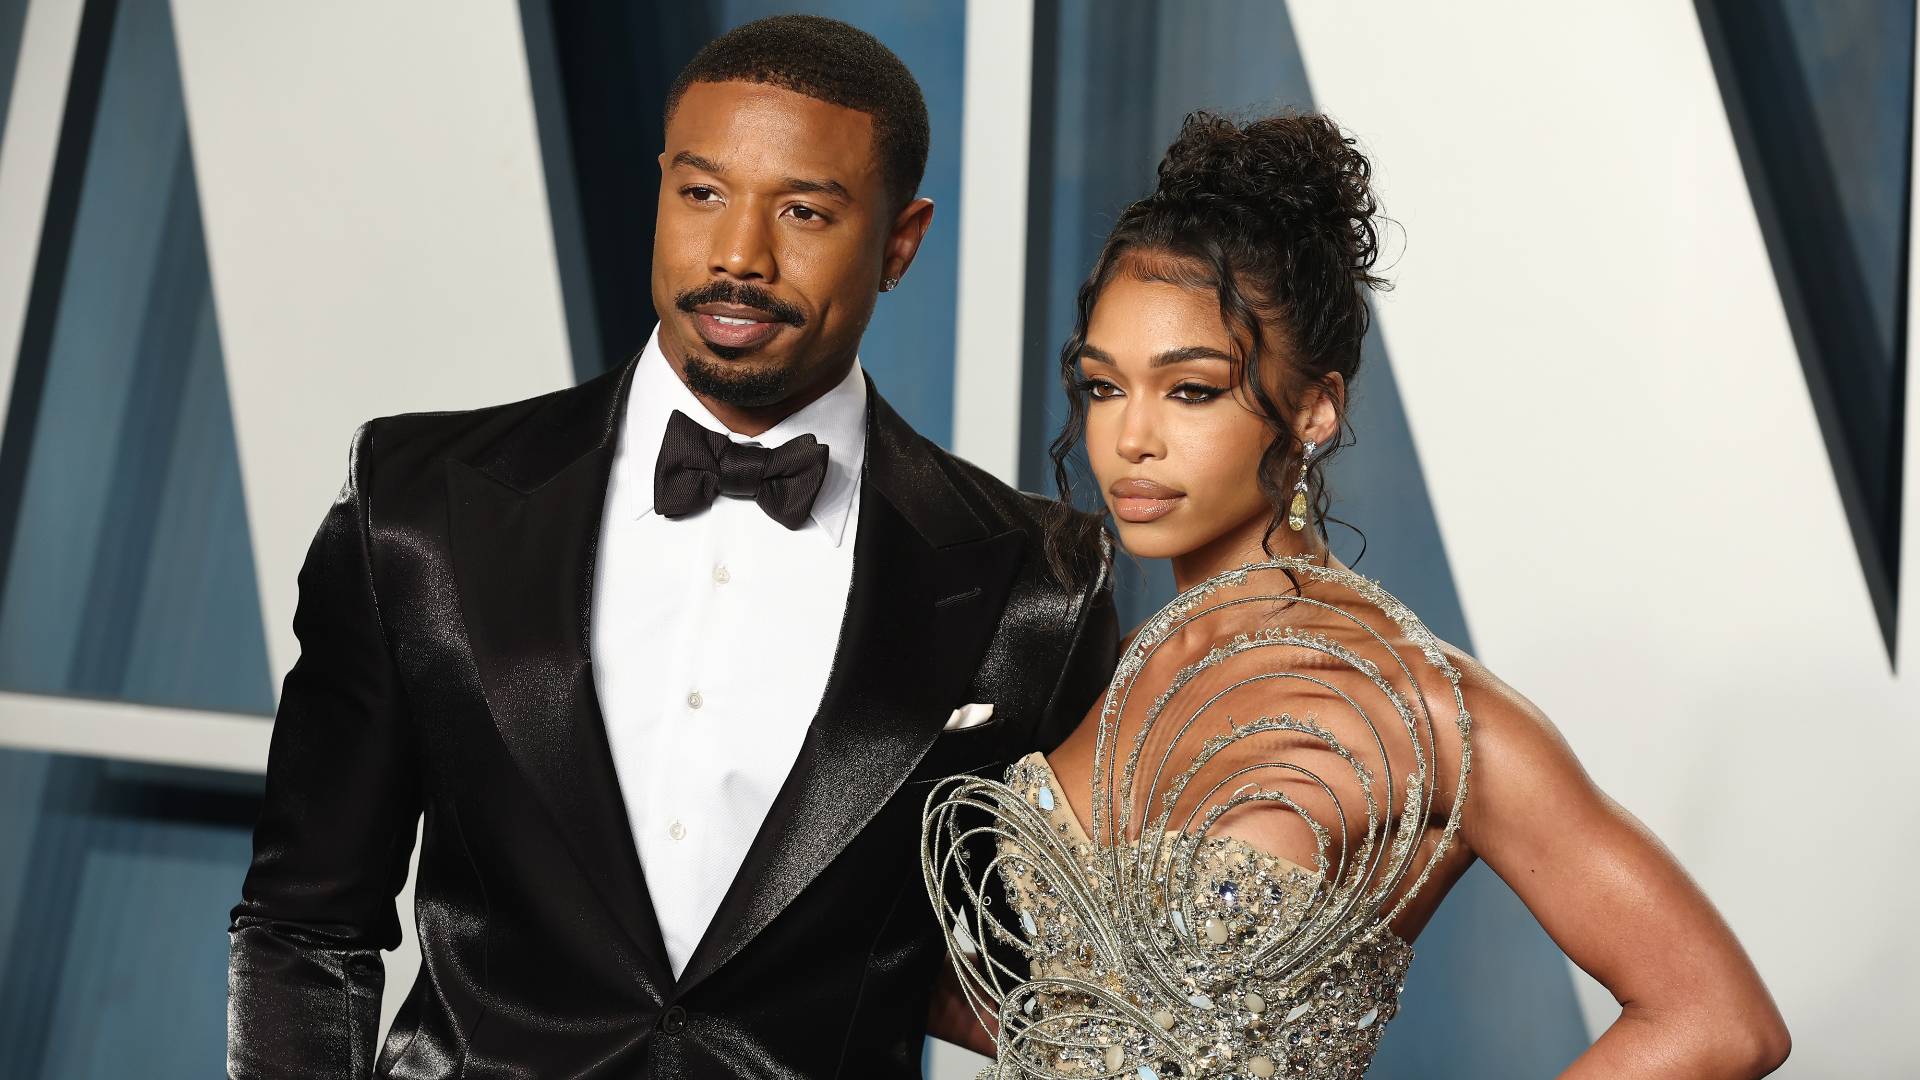 Michael B. Jordan and Lori Harvey attend the 2022 Vanity Fair Oscar Party hosted by Radhika Jones at Wallis Annenberg Center for the Performing Arts on March 27, 2022 in Beverly Hills, California. 